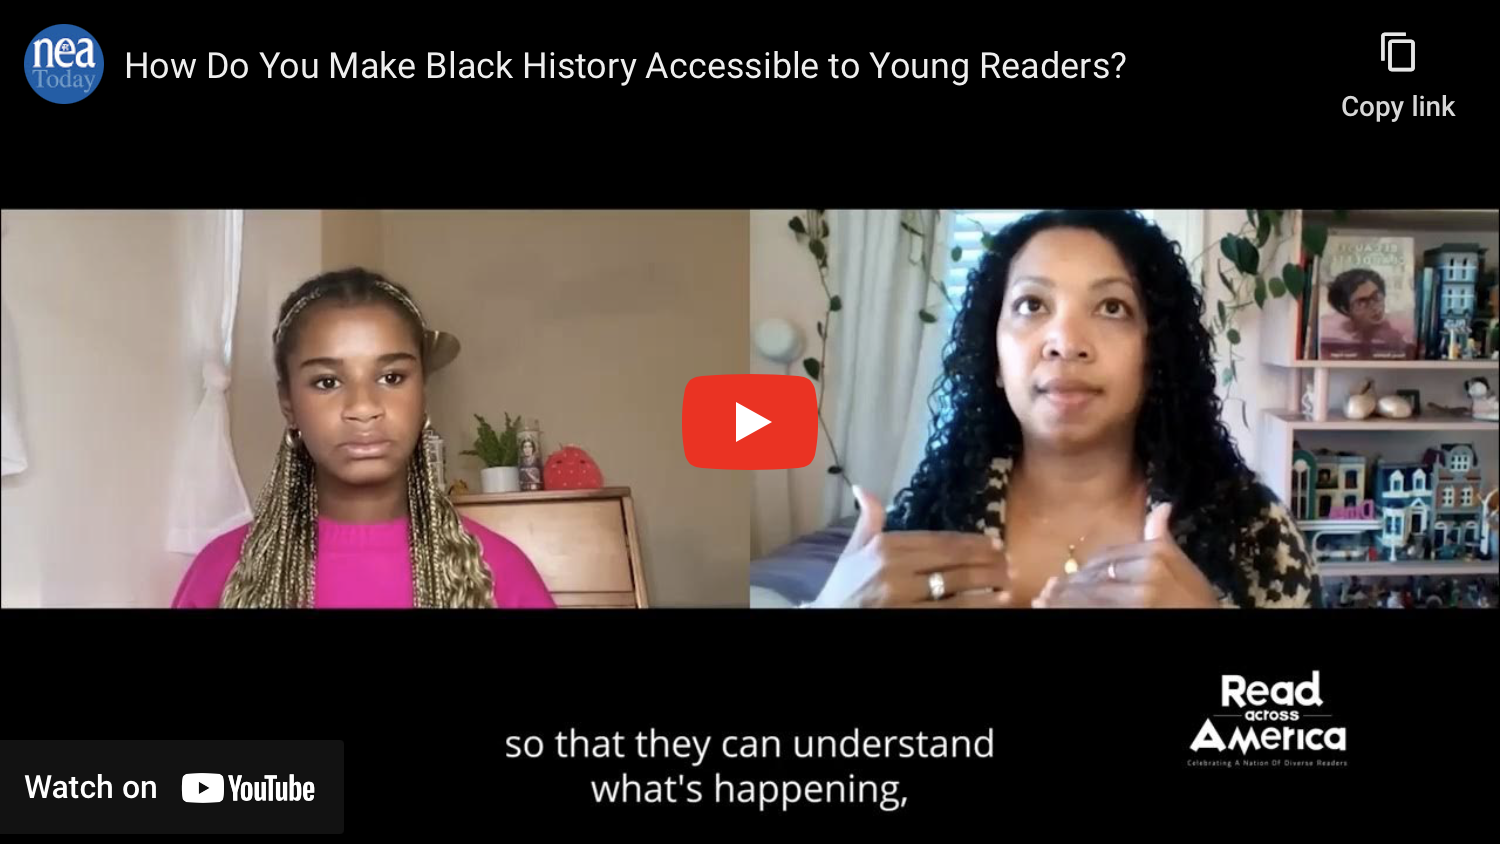 An image of the YouTube video linked here with two speakers discussing Black History Month